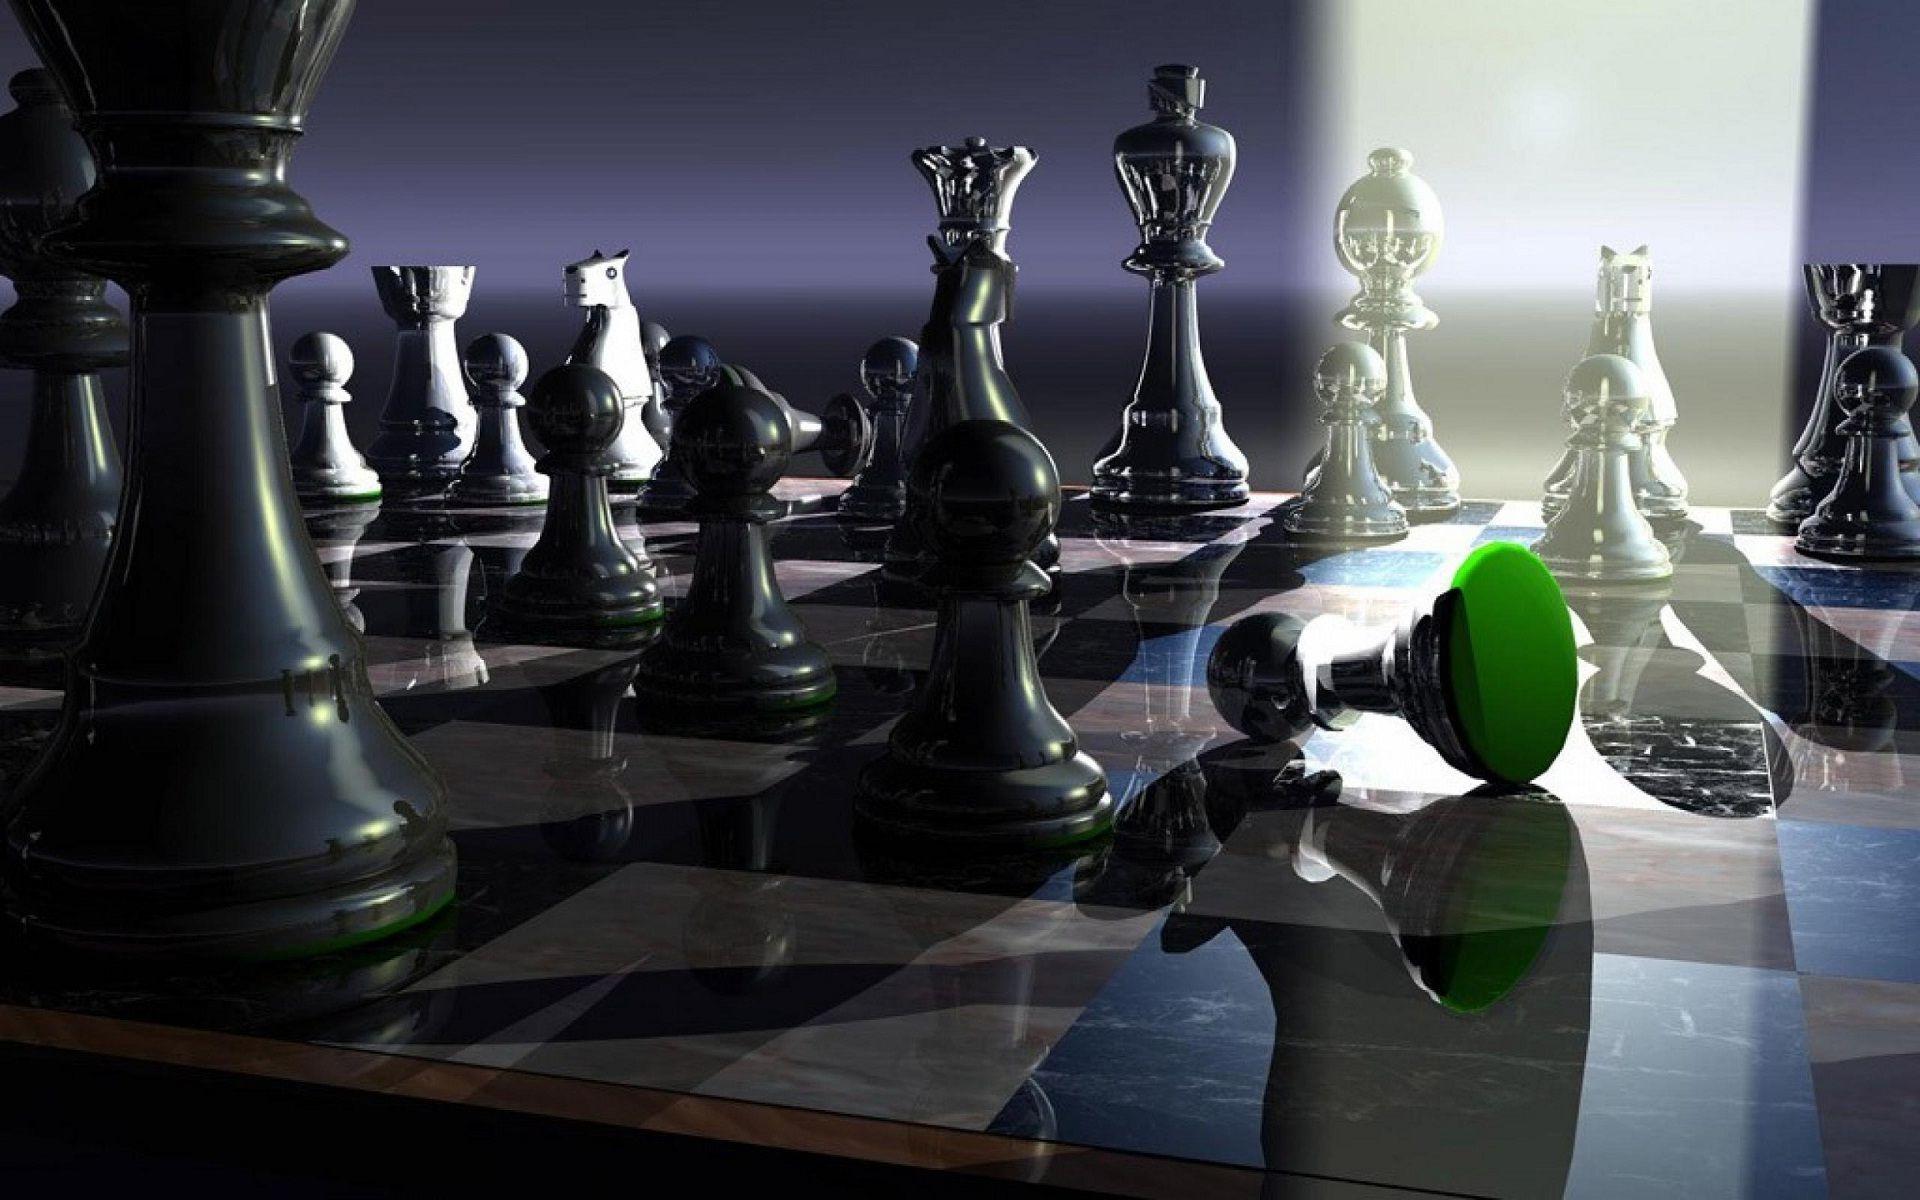 3D chess game glass mania HD Wallpaper Free